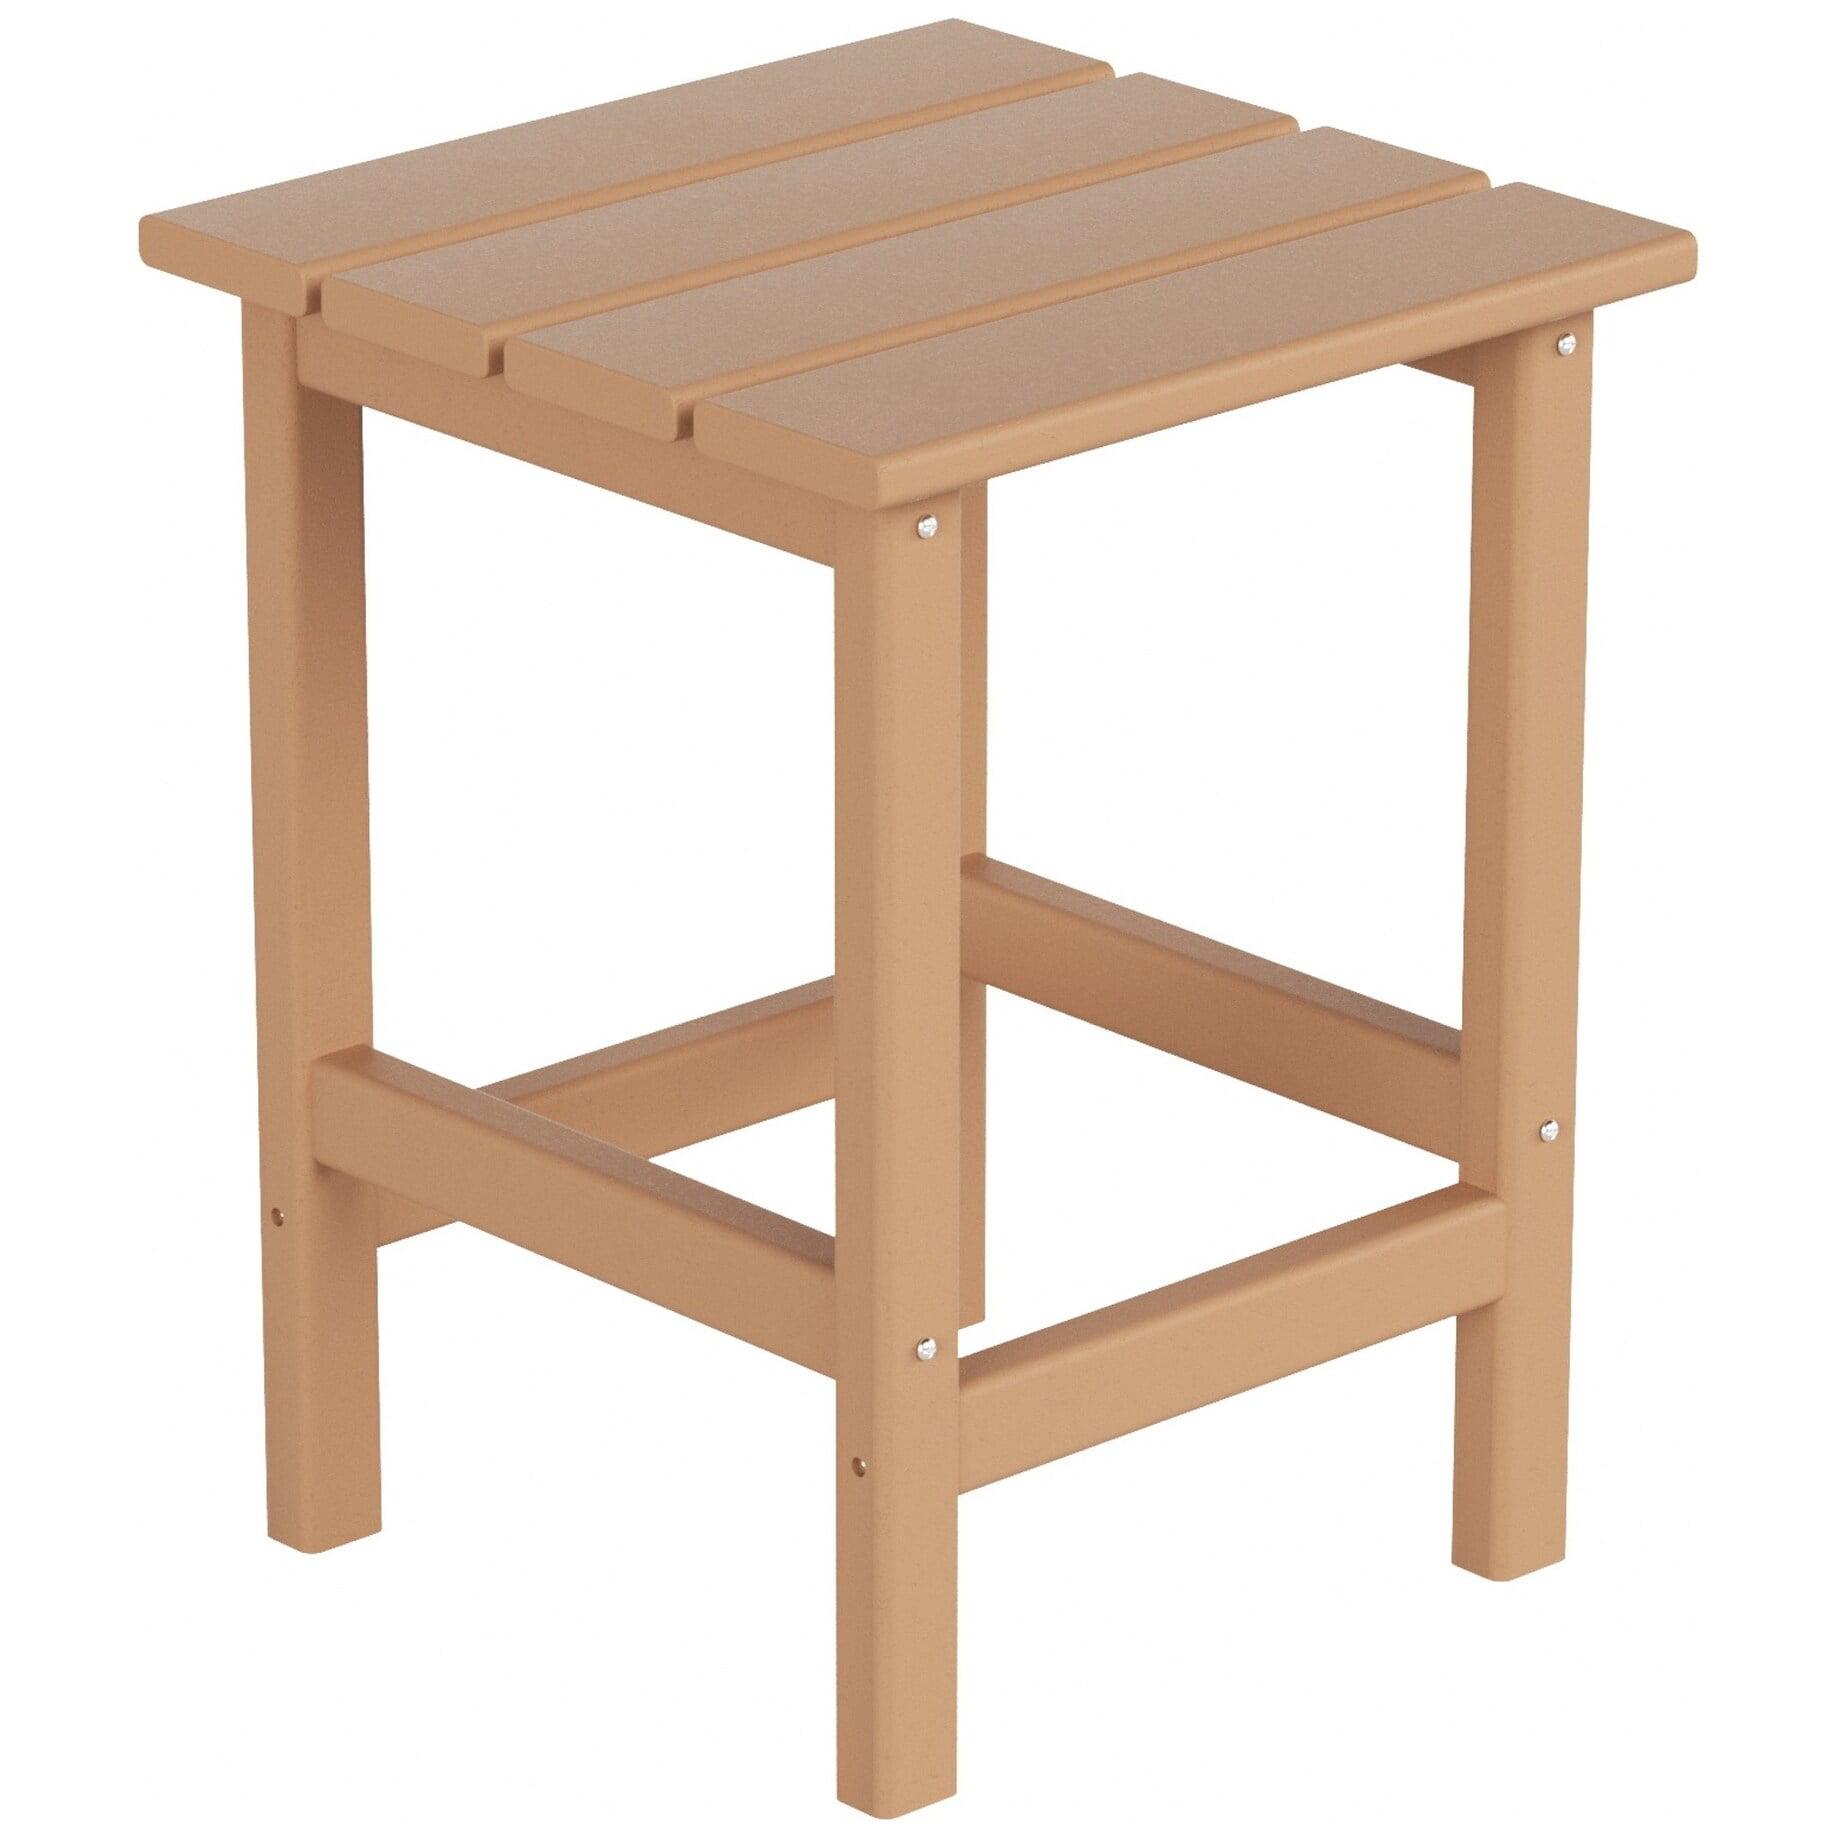 Laguna Square Teak Outdoor Side Table - All-Weather HDPE